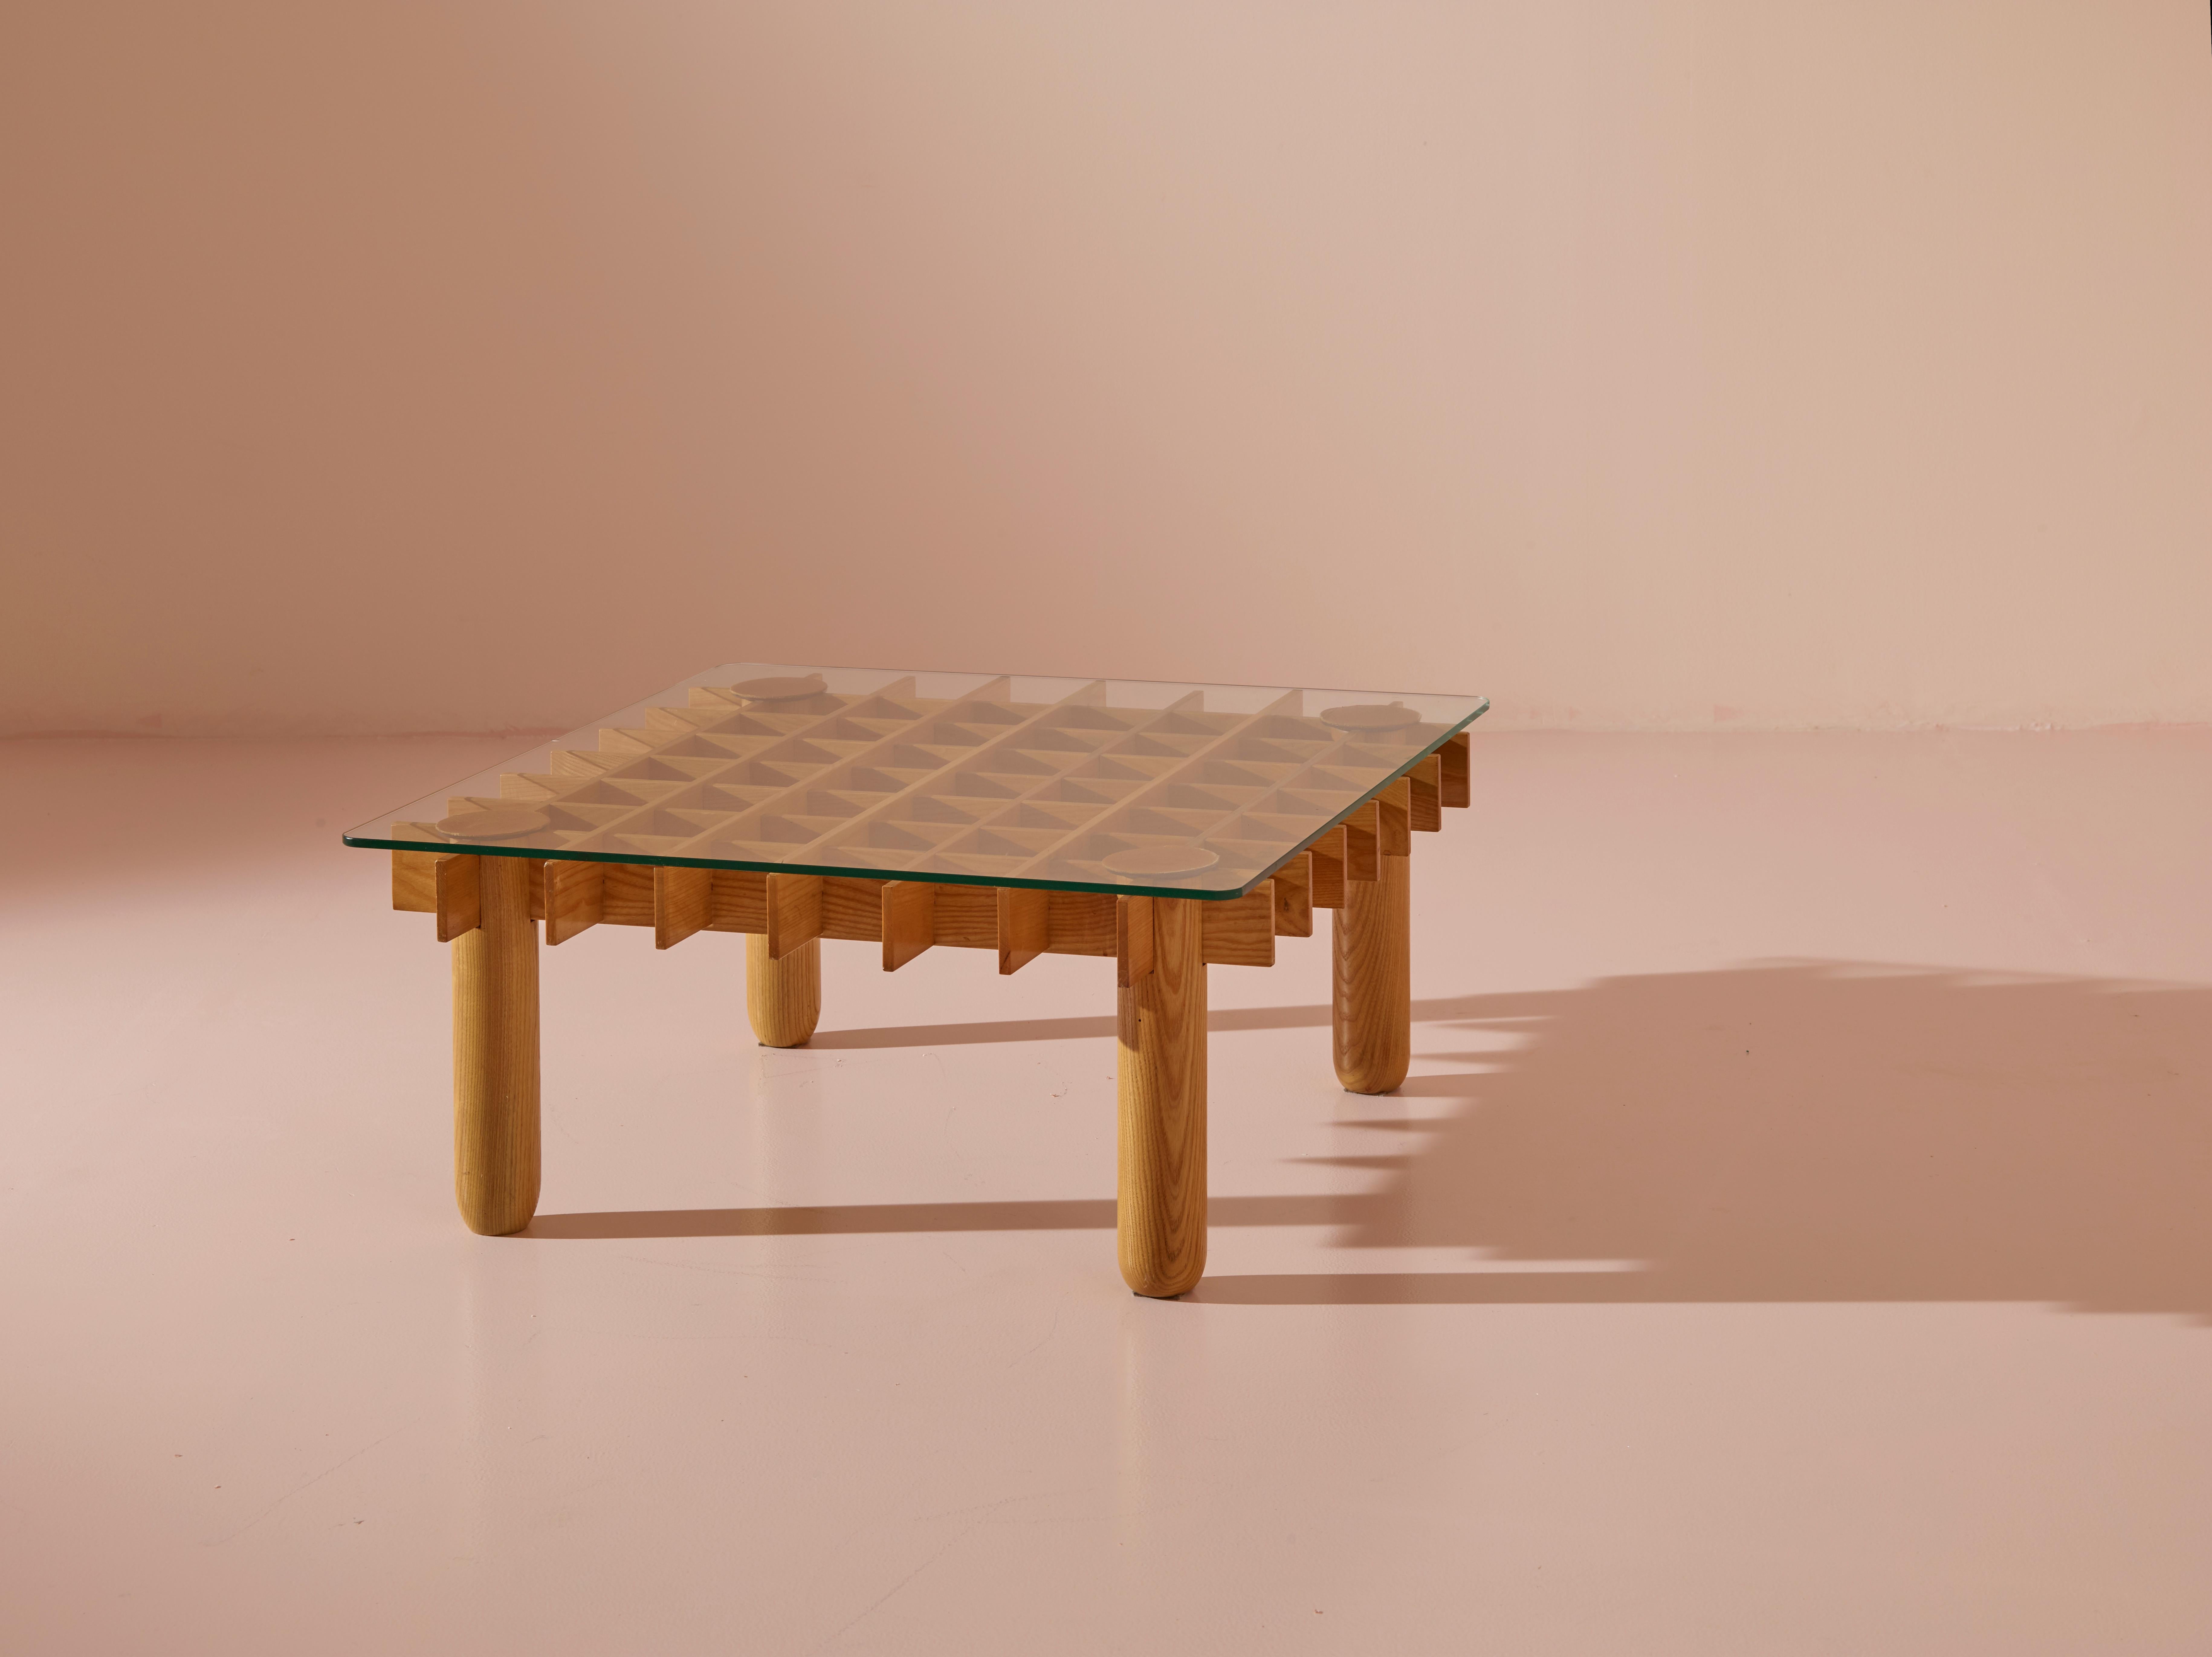 Designed by Gianfranco Frattini, produced in a small amount of pieces by Ghiande, Italy, and distributed by Knoll, the 'Kyoto' coffee table from 1974 embodies a unique blend of Japanese architectural influence and Italian craftsmanship. Crafted in